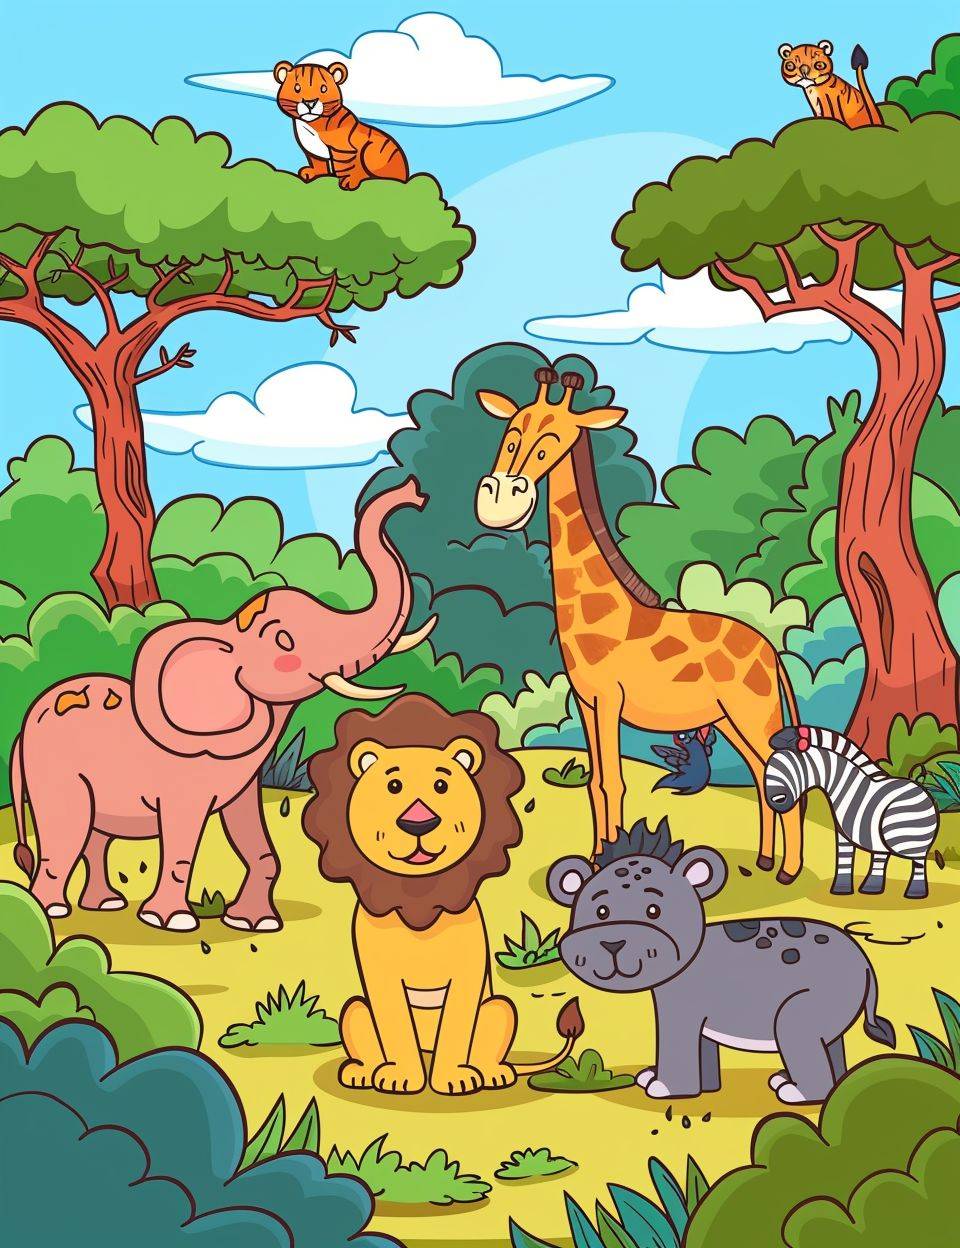 Generate a cartoon-style image of an African bush with happy wild animals, elephant, giraffe, lion, zebra, clean line art, no shading, use vibrant colors.